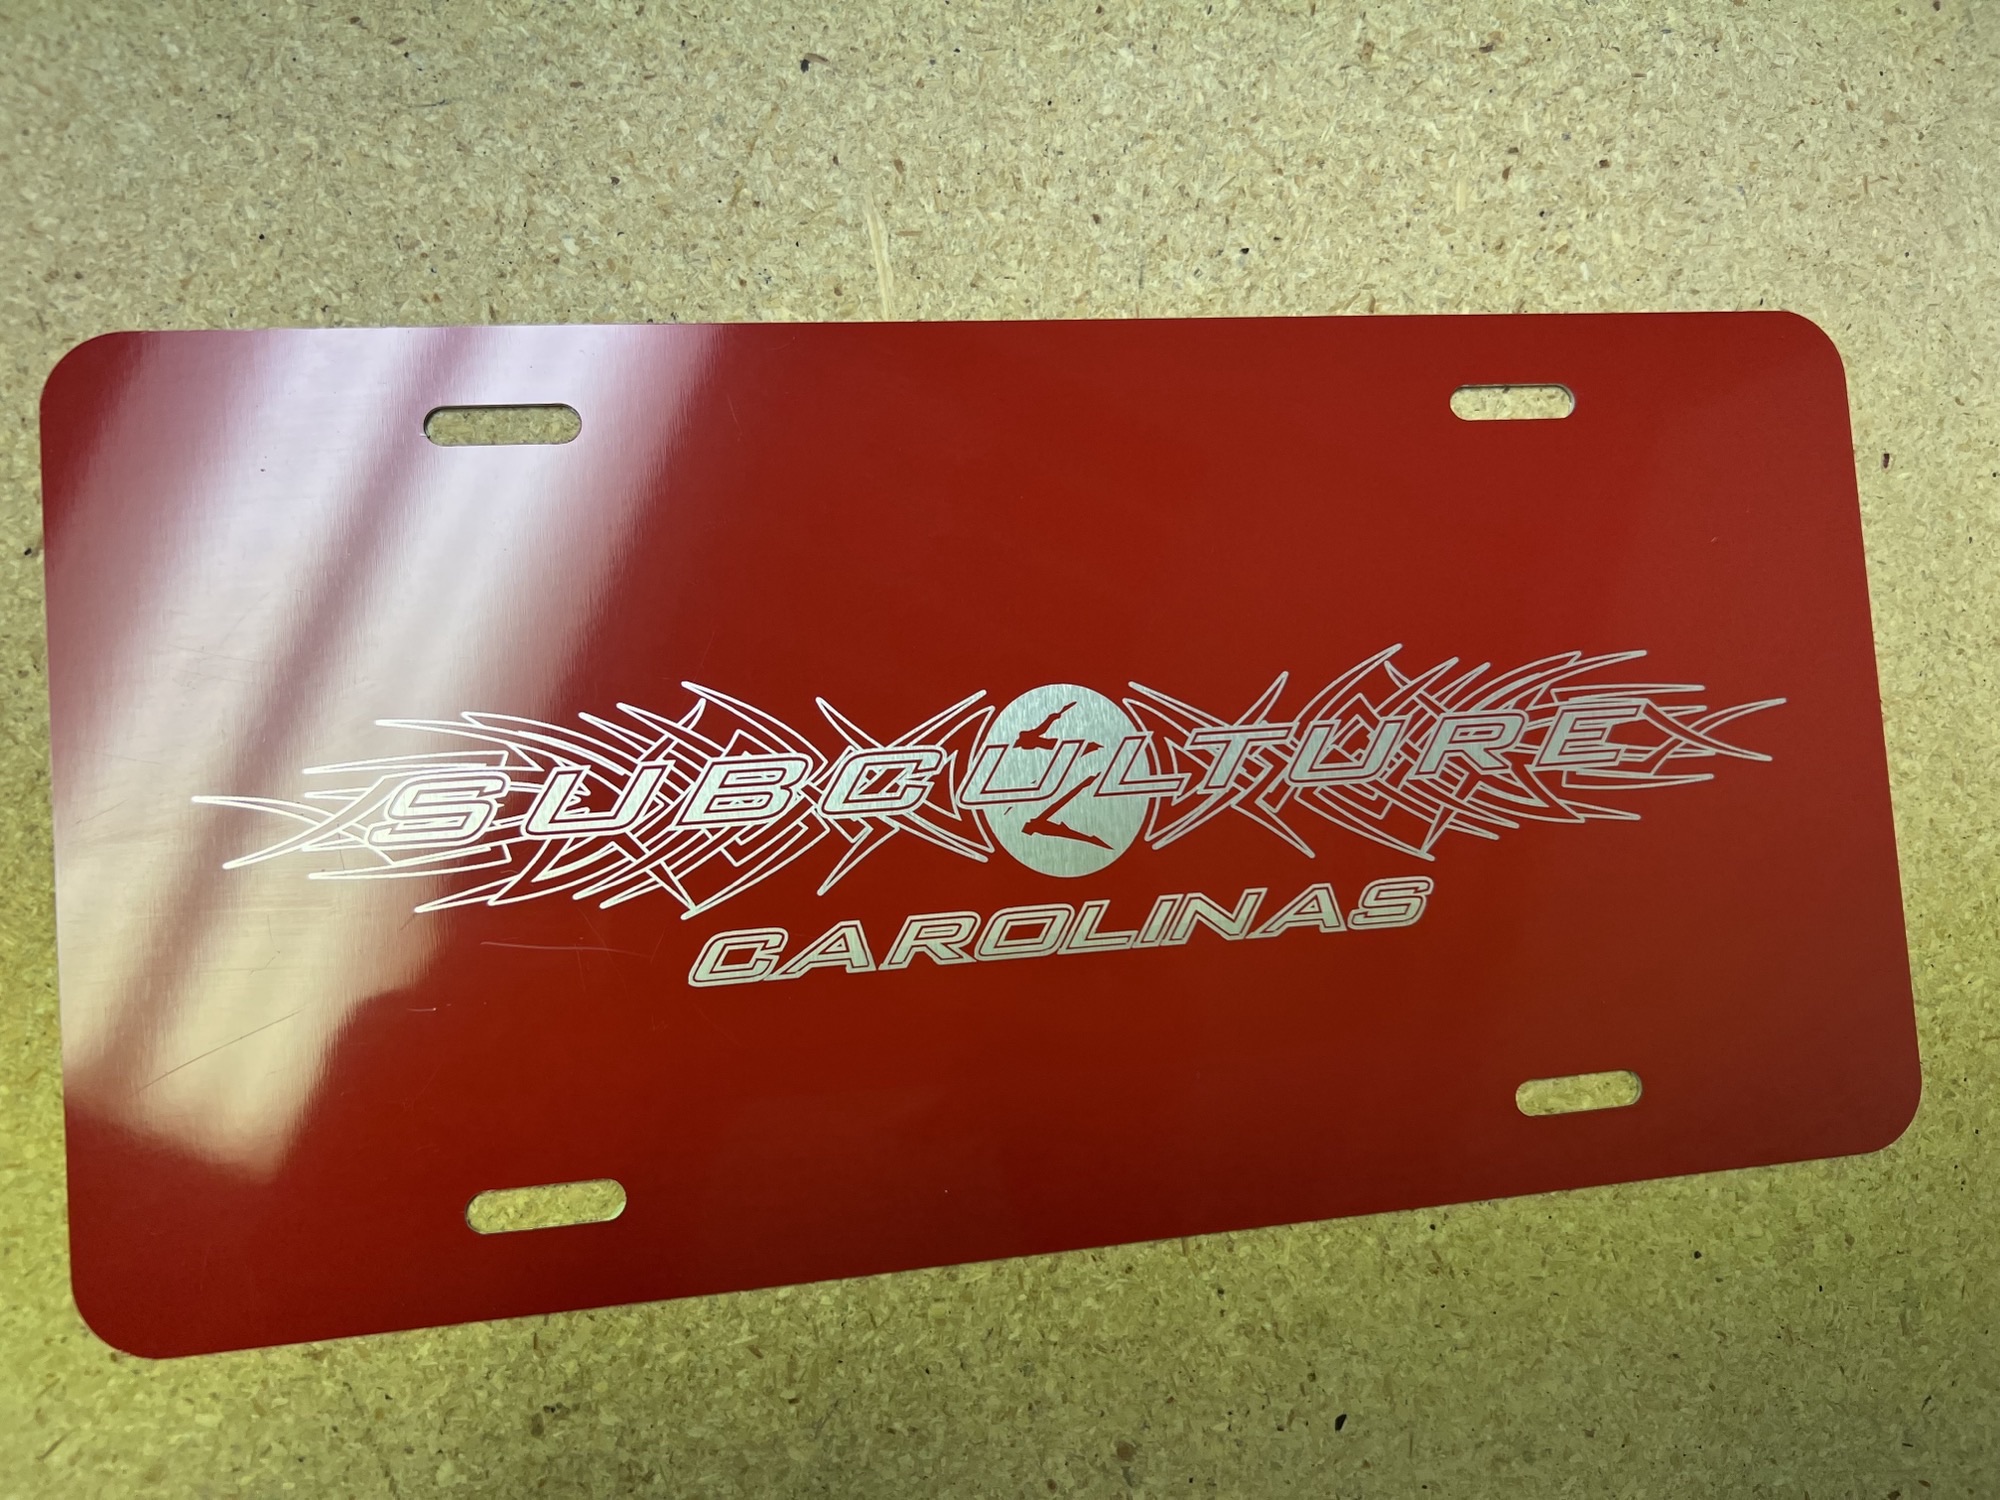 Subculture Carolinas - Stainless Steel License Plate - Red